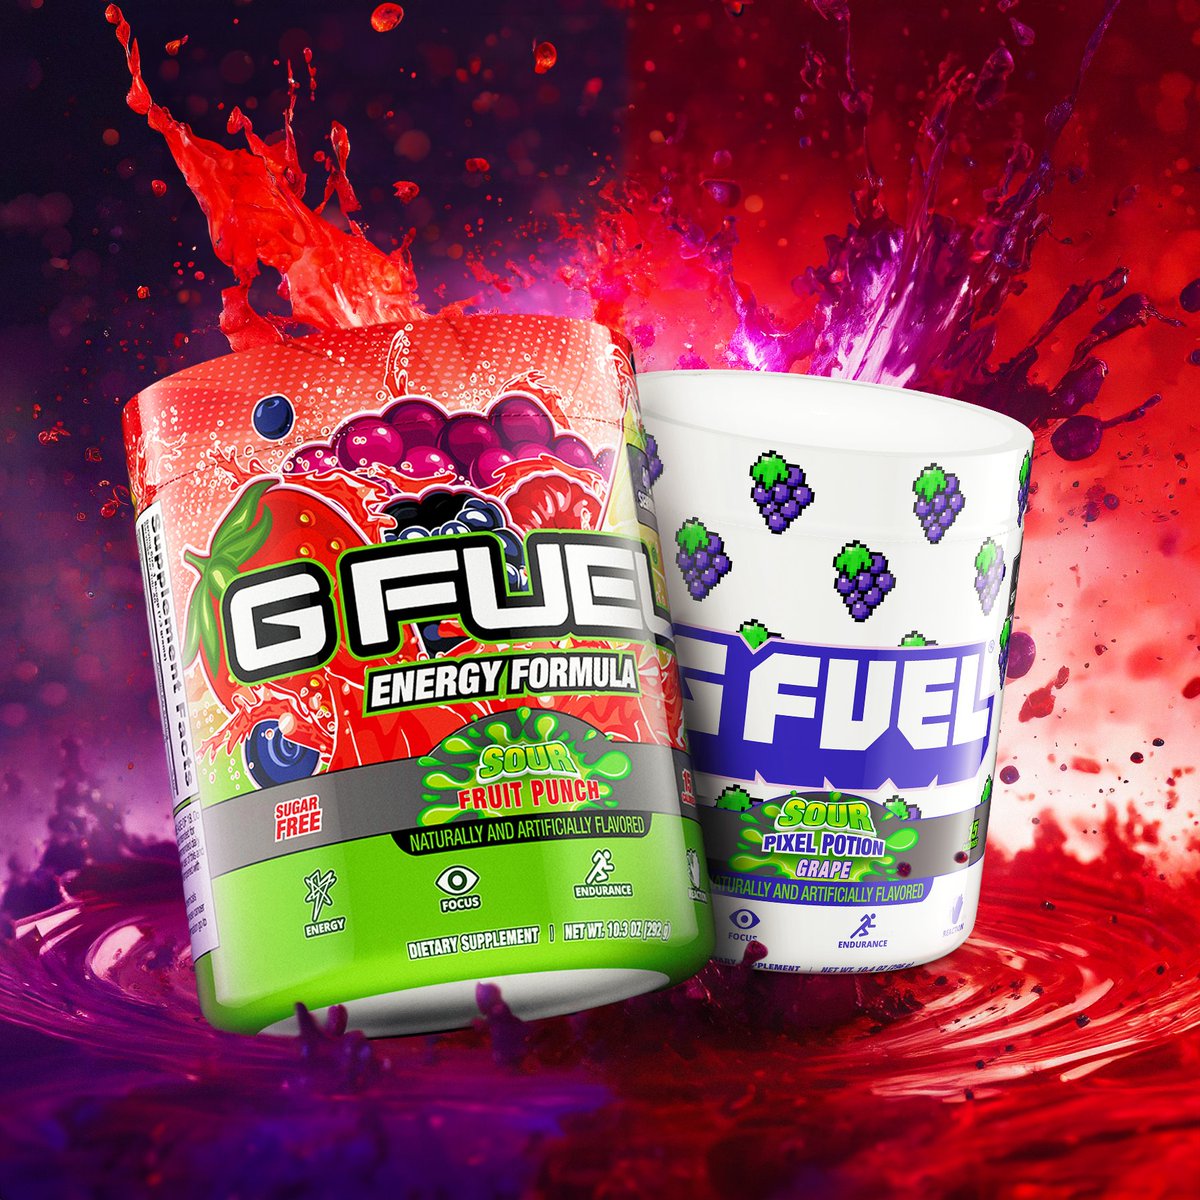 Since my community love EVEYRTHING SOUR on my channel, make sure to go and grab these puckering flavors! 🍋🍉

Add it to your basket NOW and send me a video of you trying it WITHOUT PULLING A FACE😱#GFUEL #GFUELSour @GFuelEnergy 

🛒affiliateshop.gfuel.com/74s
🎫Code 'COOPS'